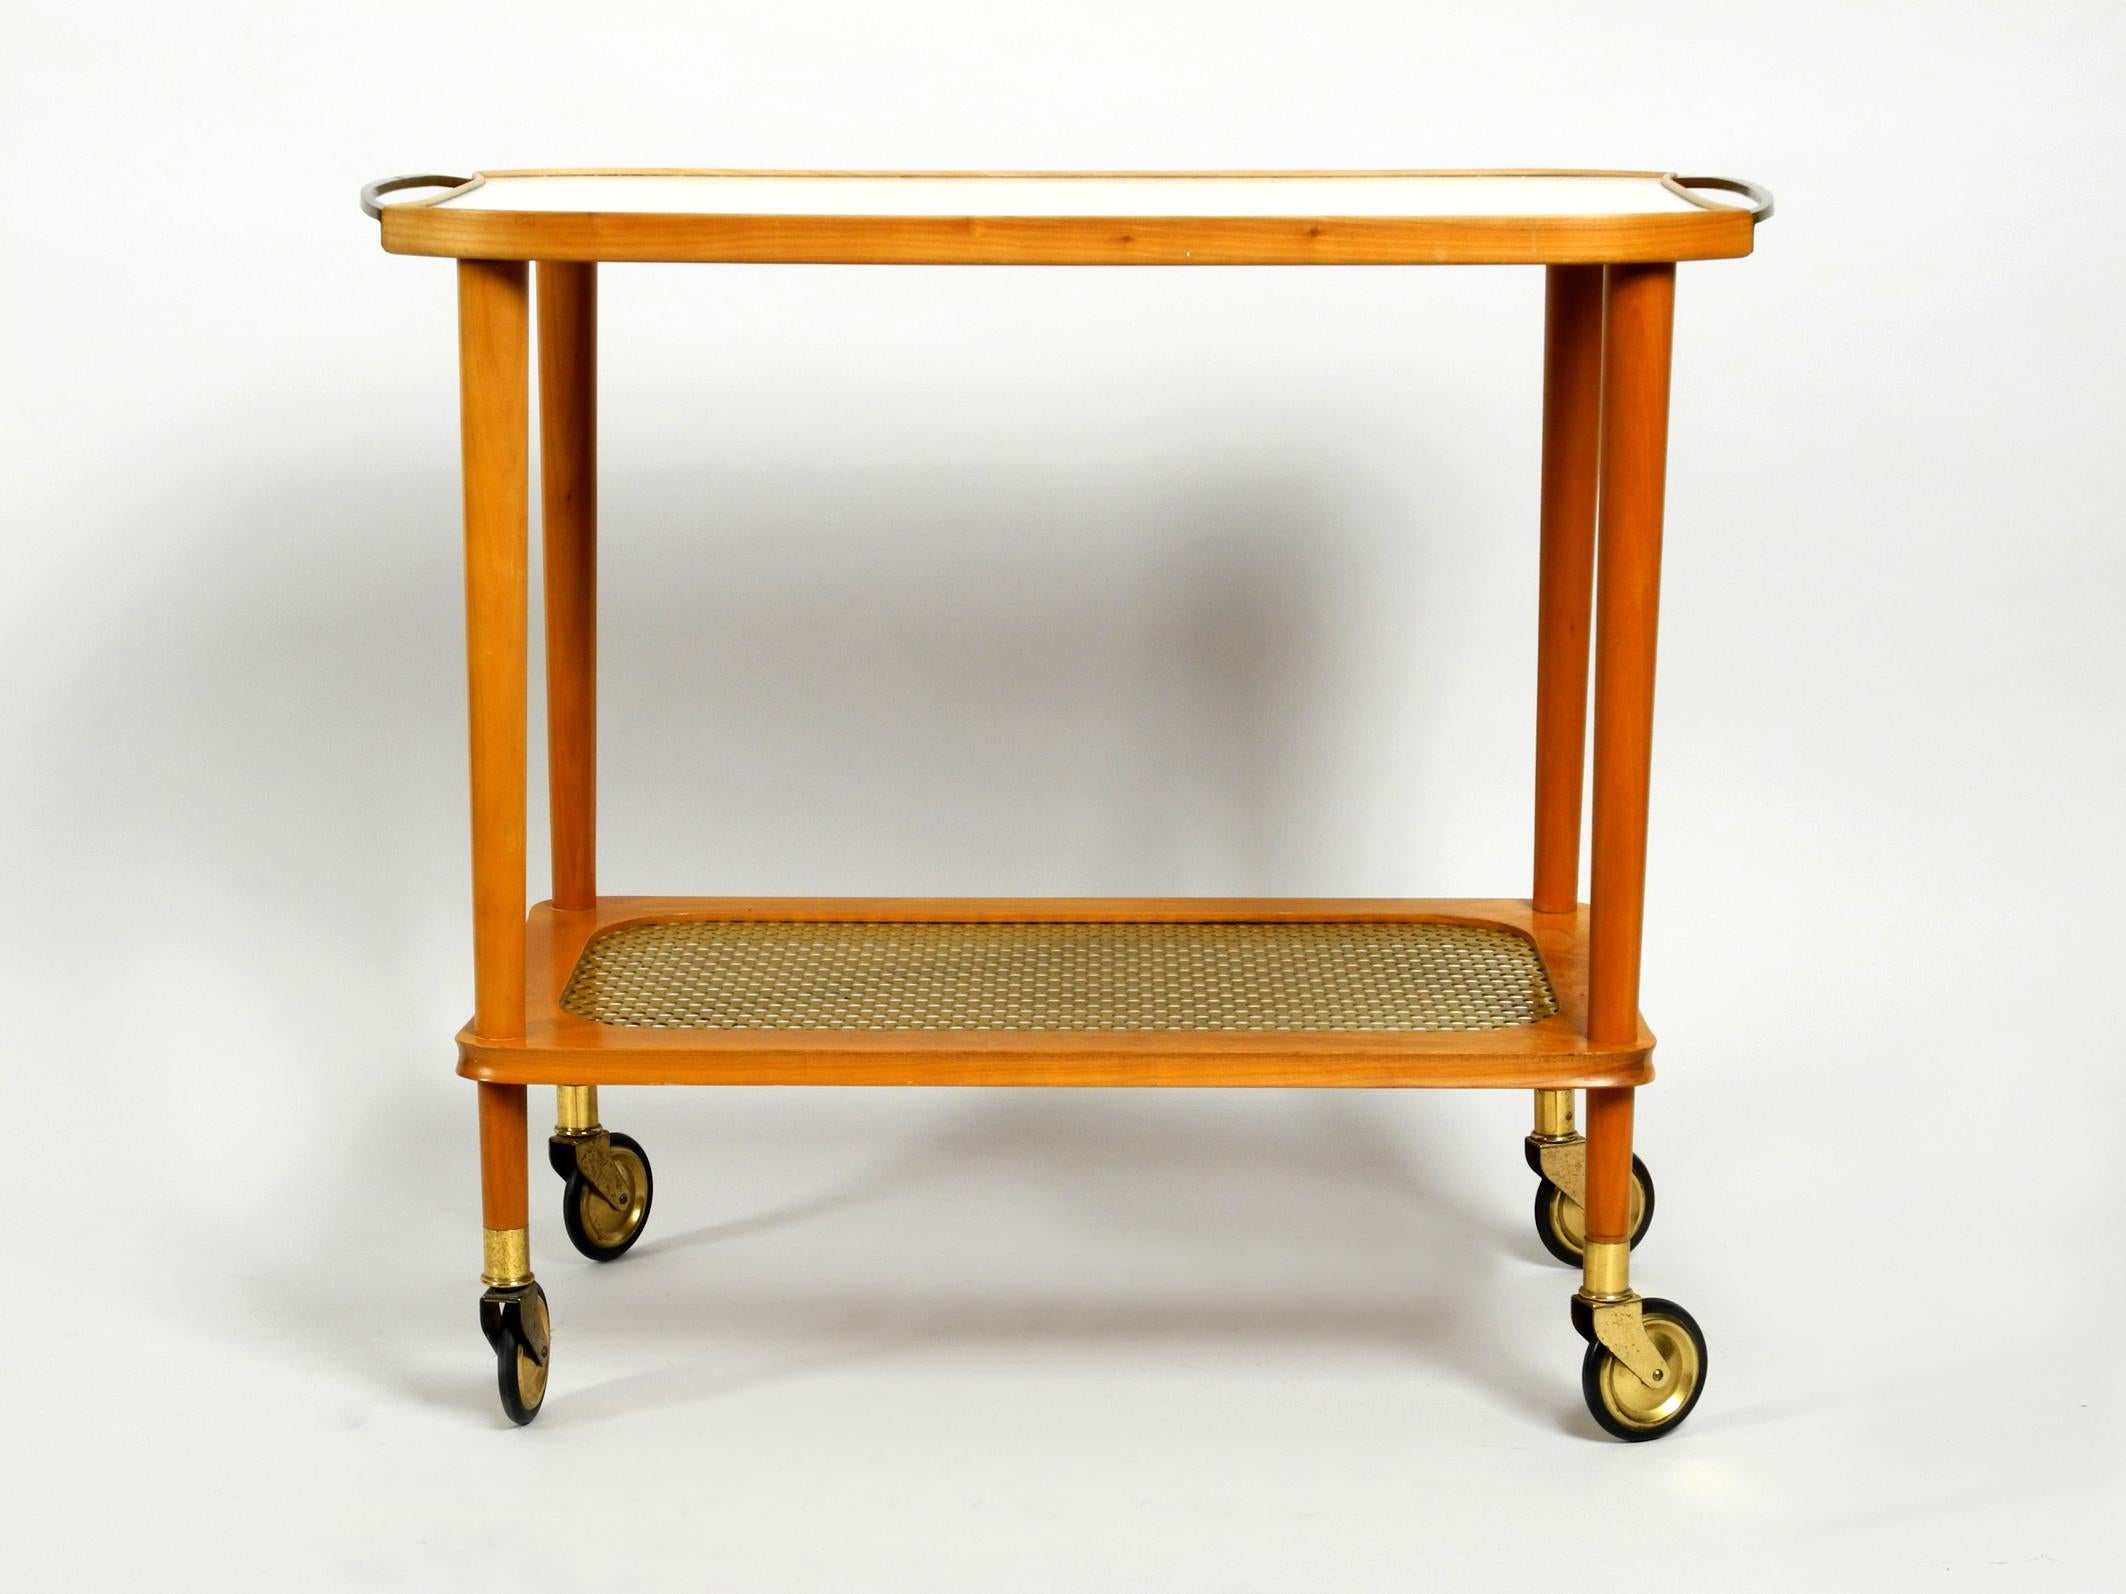 German Beautiful Mid-Century Modern Serving Trolley Made of Walnut Wood and Brass